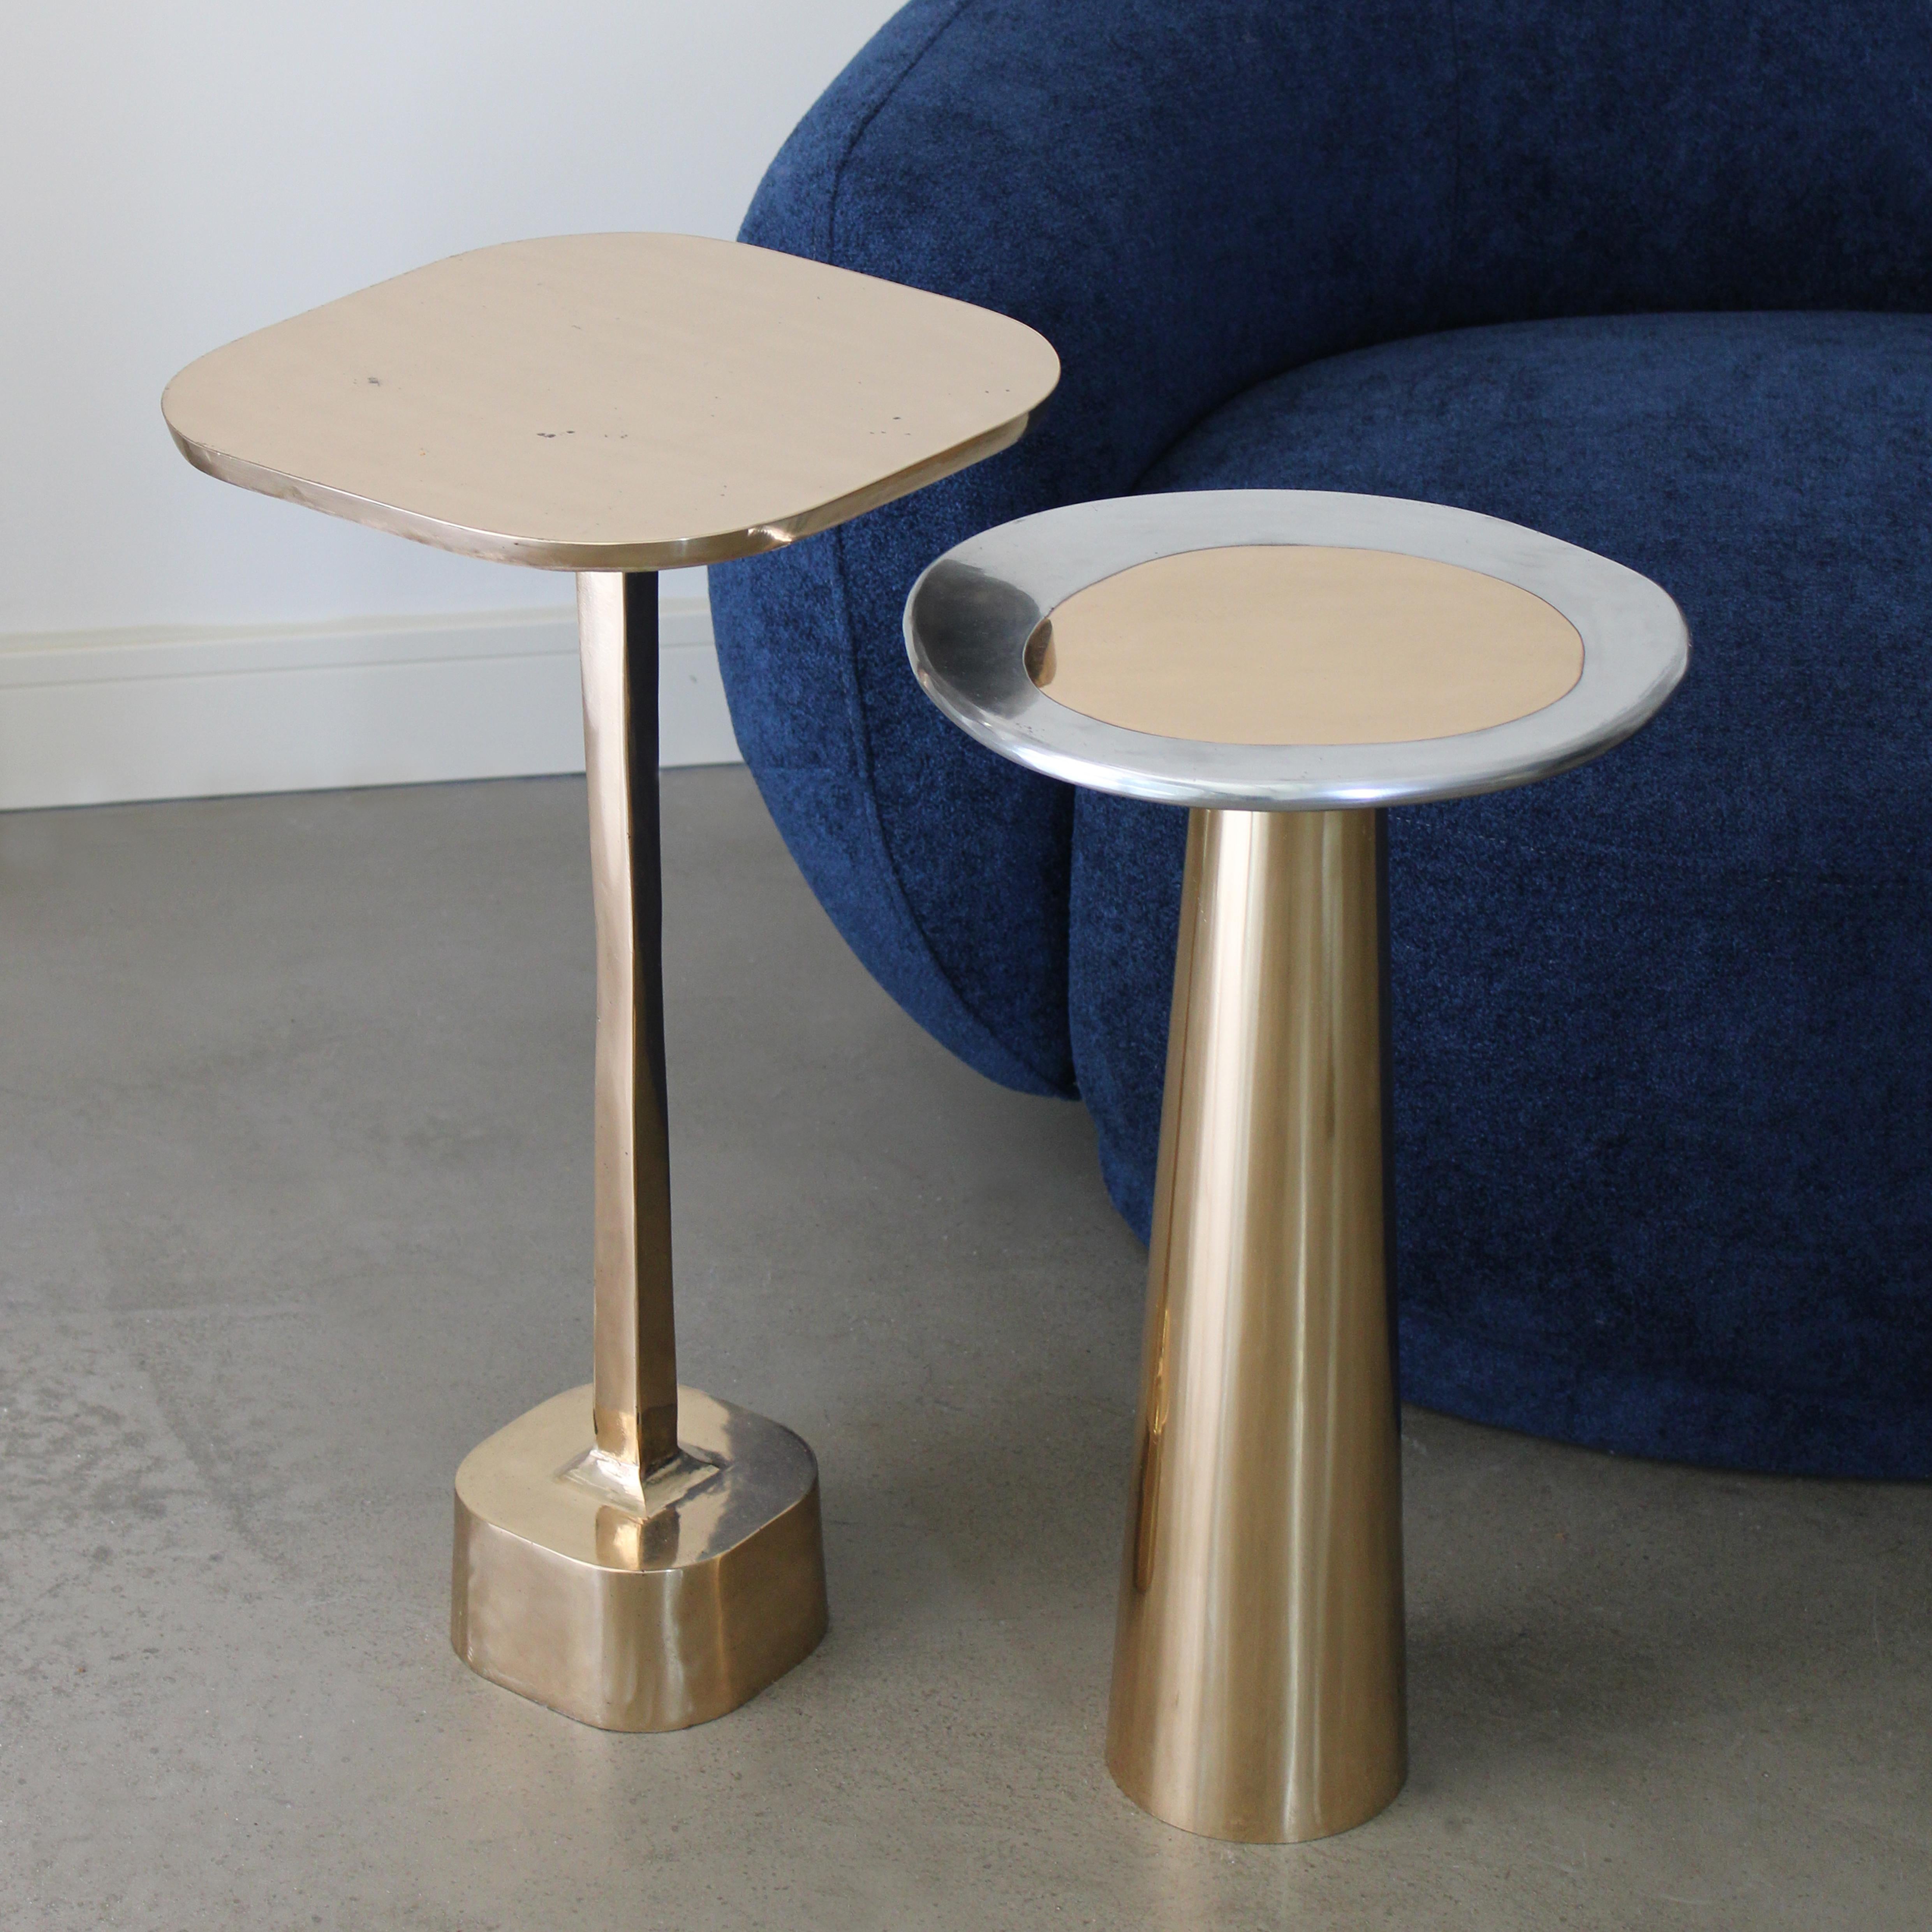 The Cone Table is inspired by the interconnections between the elements and life forms. The conical shape of the base, the asymmetrical form of the top, and the rounded edges provide the table with a silky appearance.

Cone Table, made of bronze